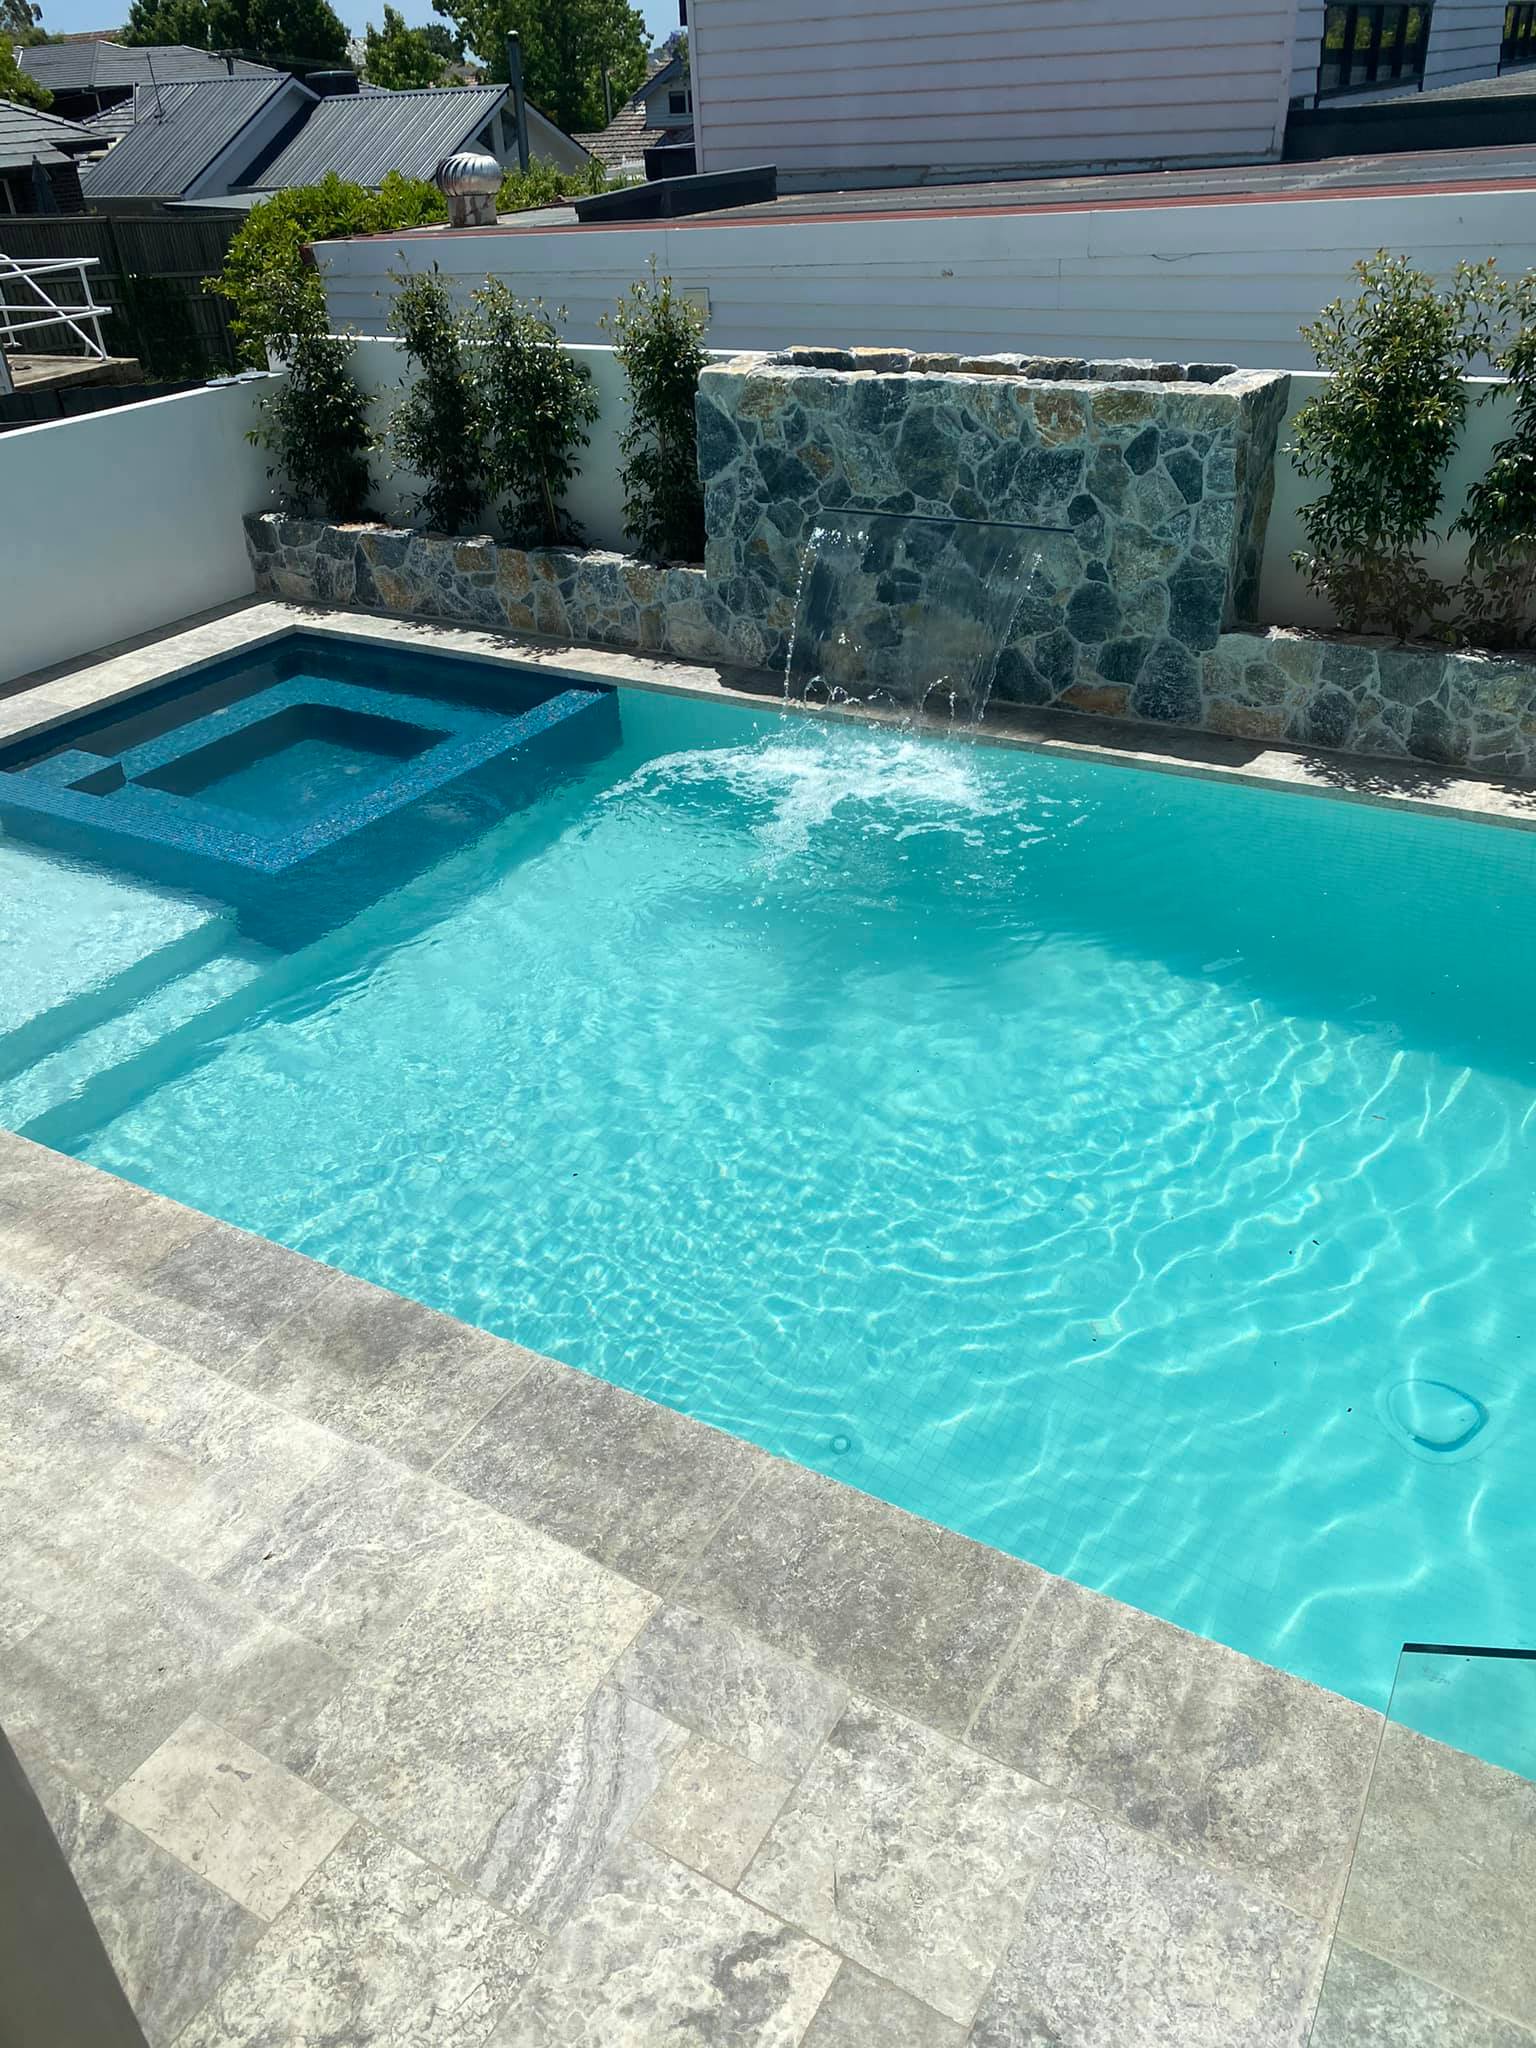 Venetian Pools Concrete In-ground Swimming Pool & Spa Design and Construction in Melbourne